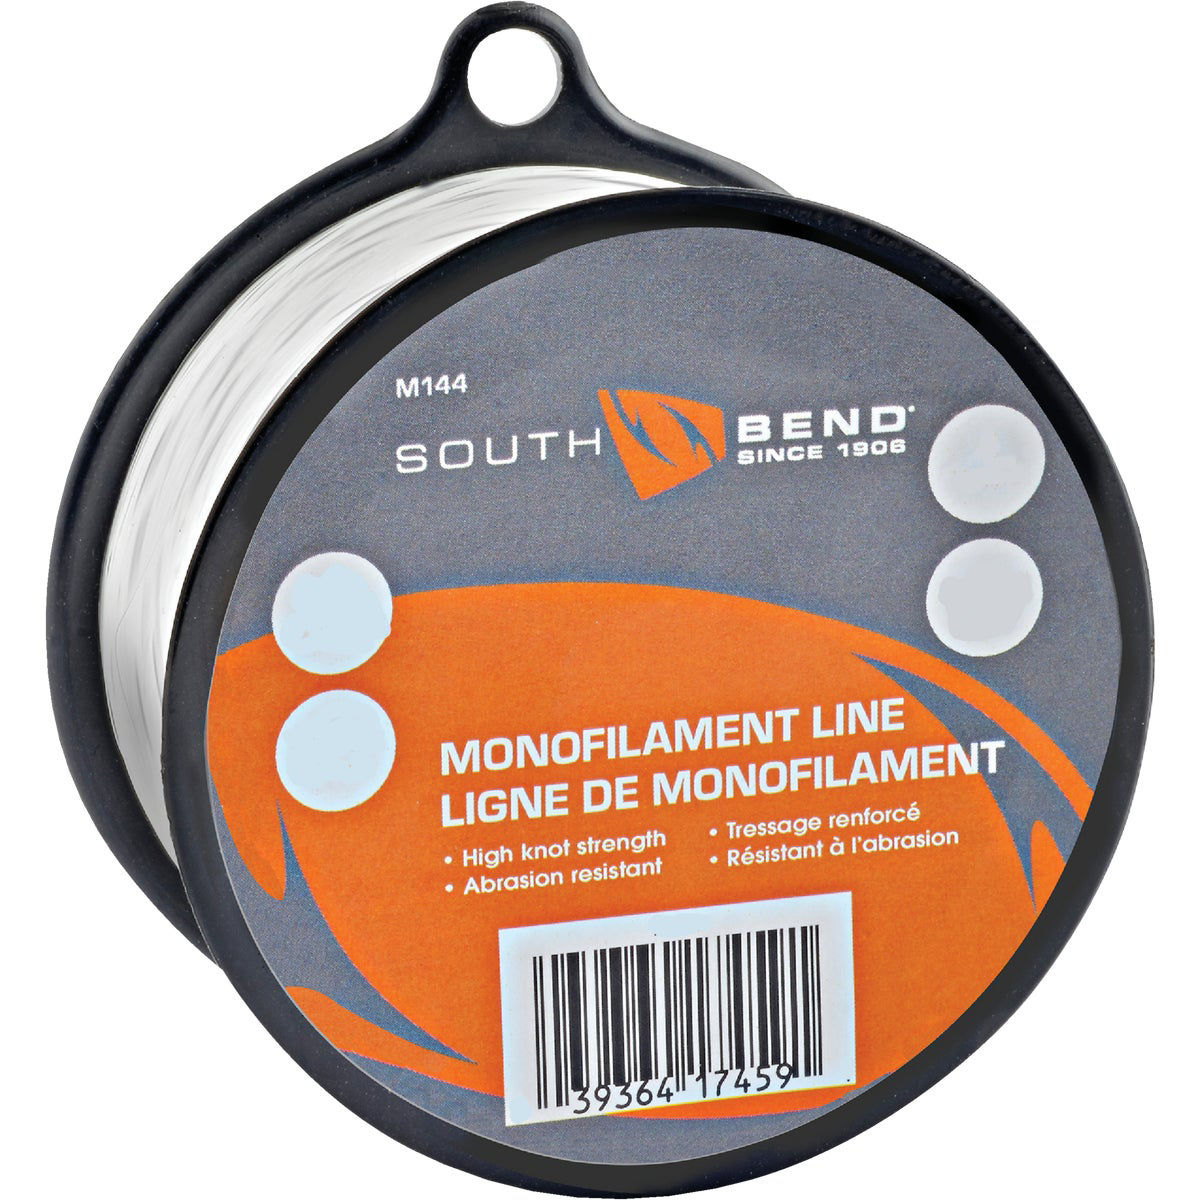 SouthBend 4 Lb. 1125 Yd. Clear Monofilament Fishing Line